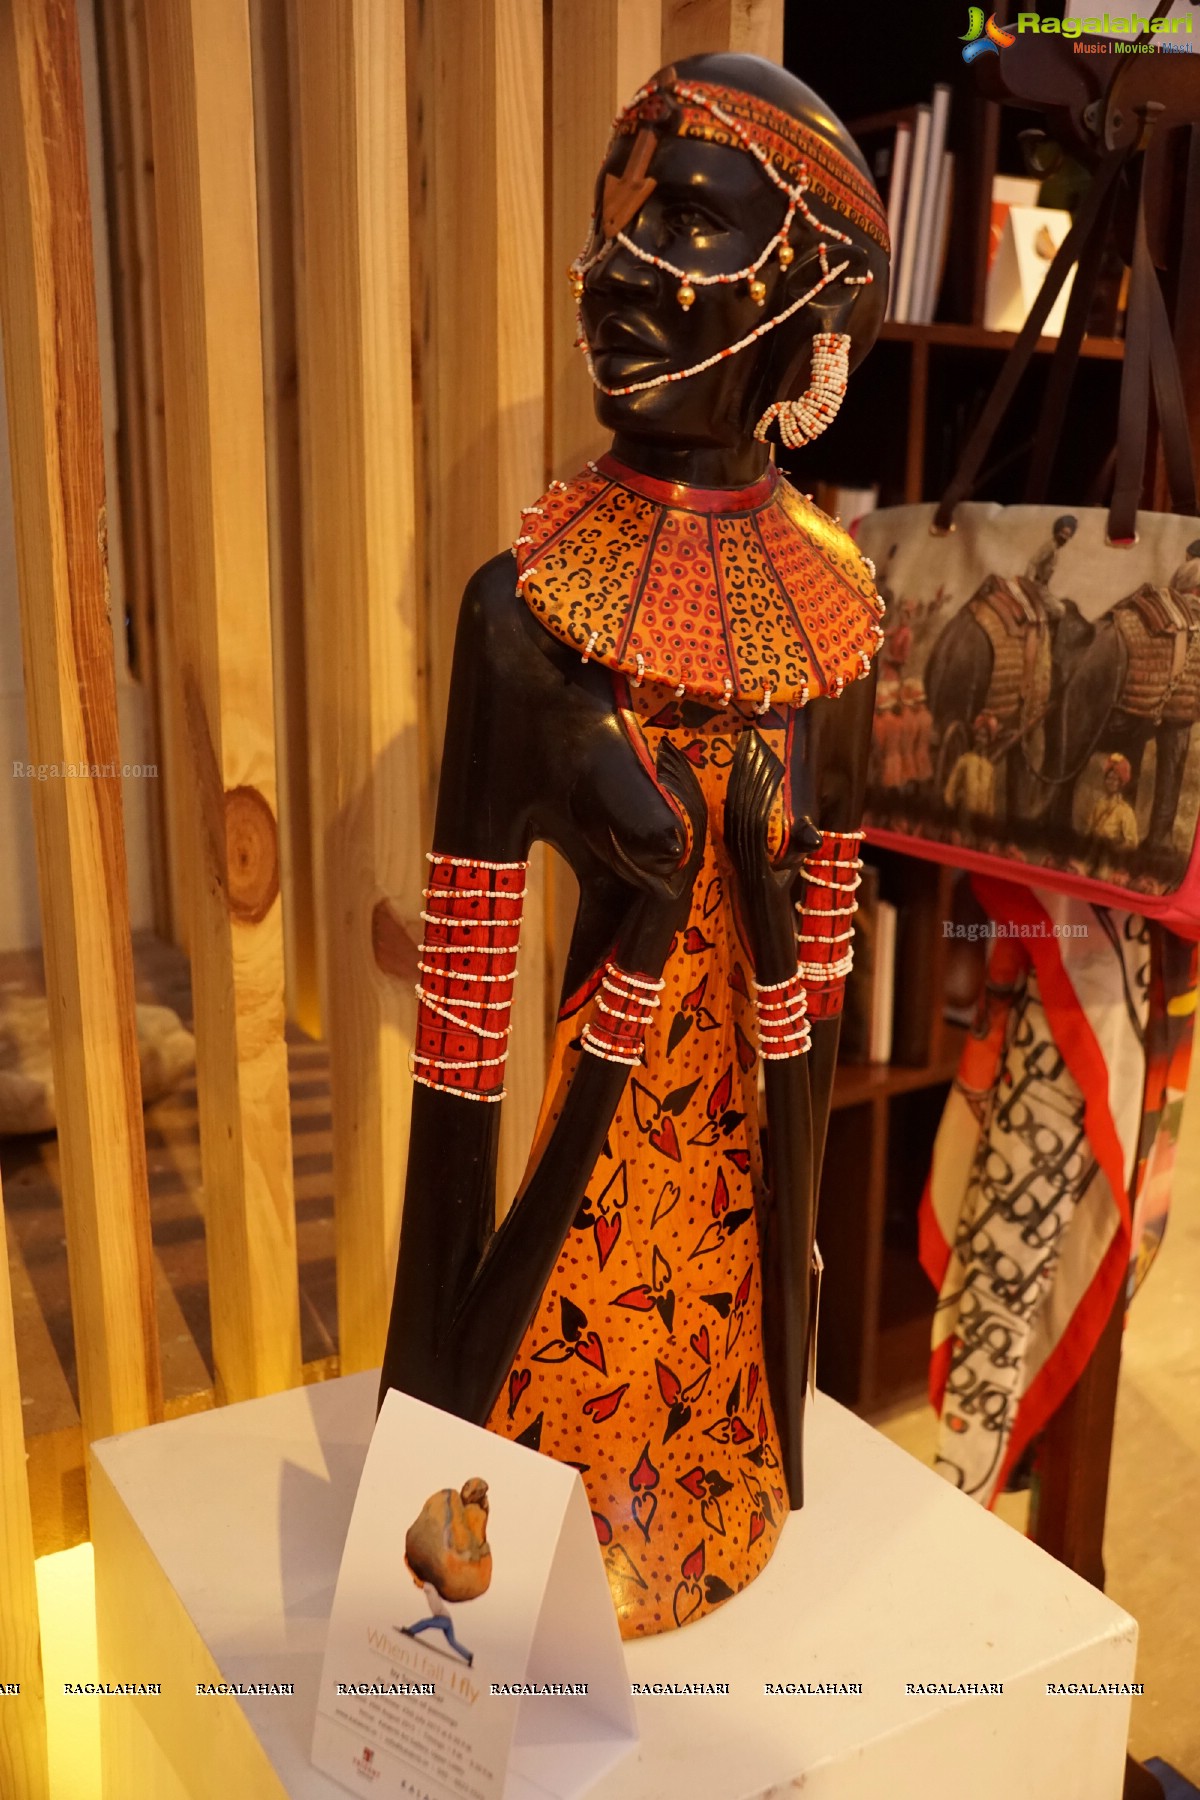 Africraft Exhibition at The Gallery Cafe, Hyderabad